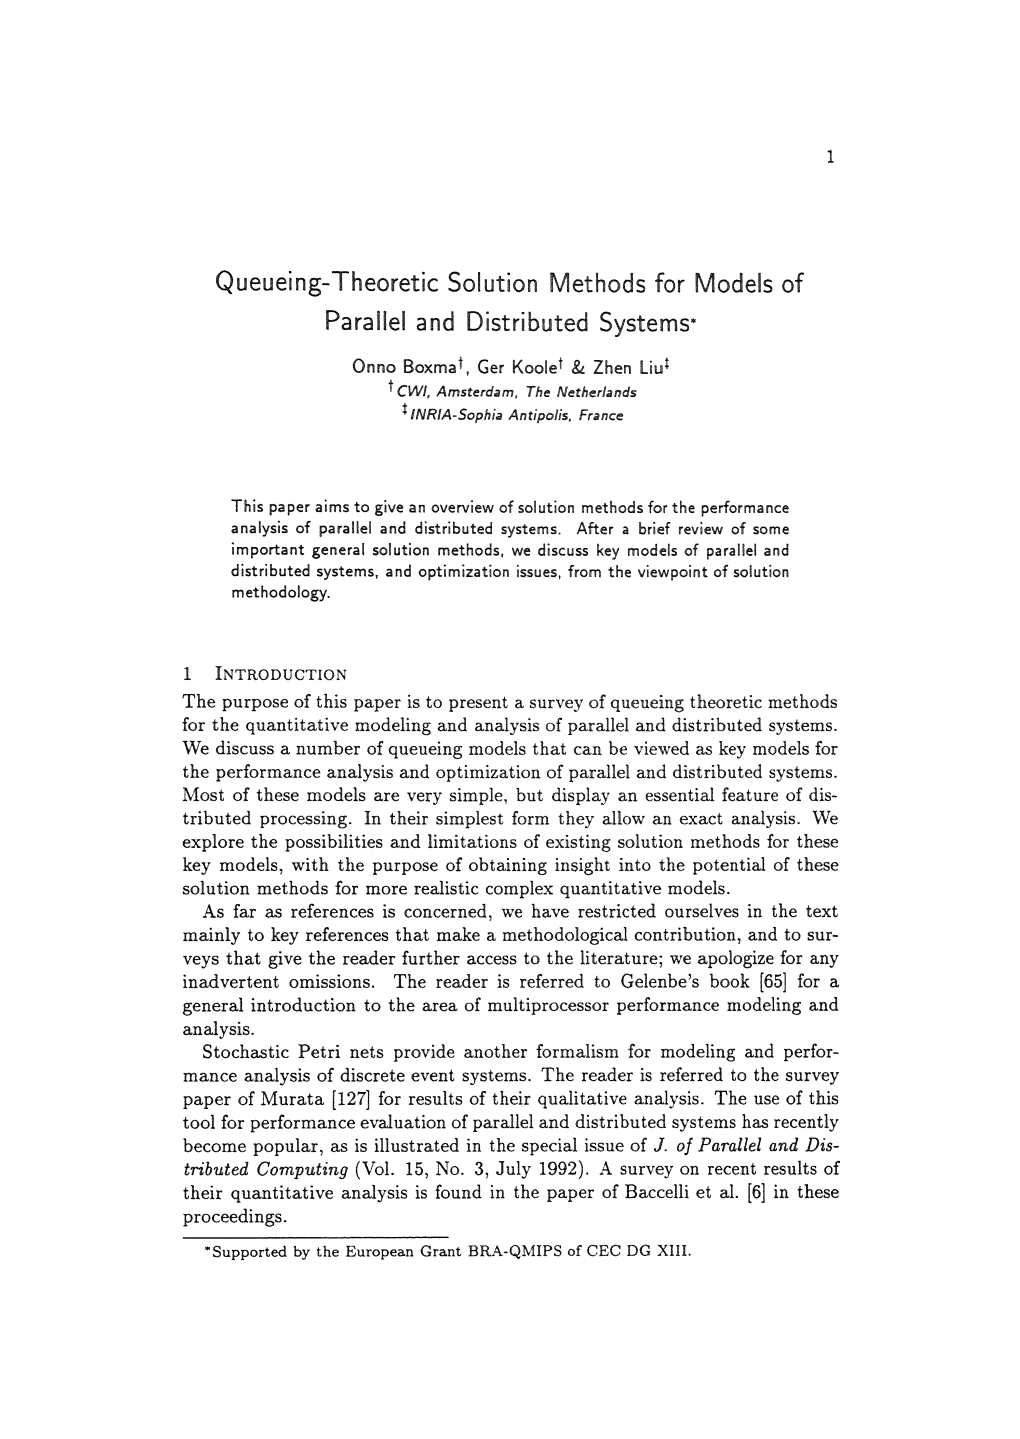 Queueing-Theoretic Solution Methods for Models of Parallel and Distributed Systems·